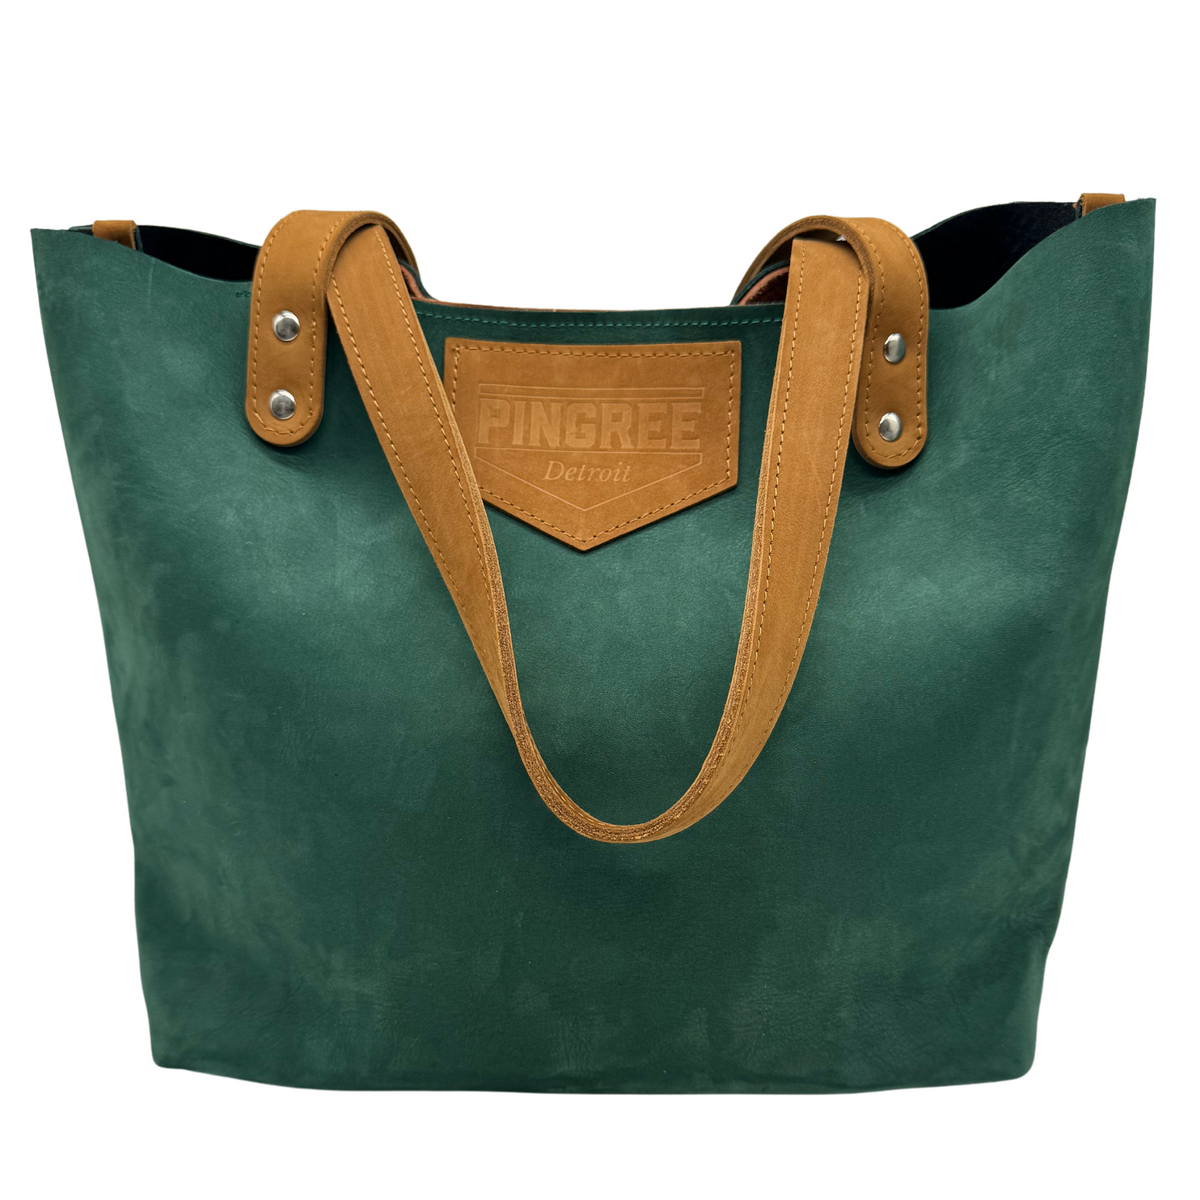 rolled-handles leather tote bag, Chloé